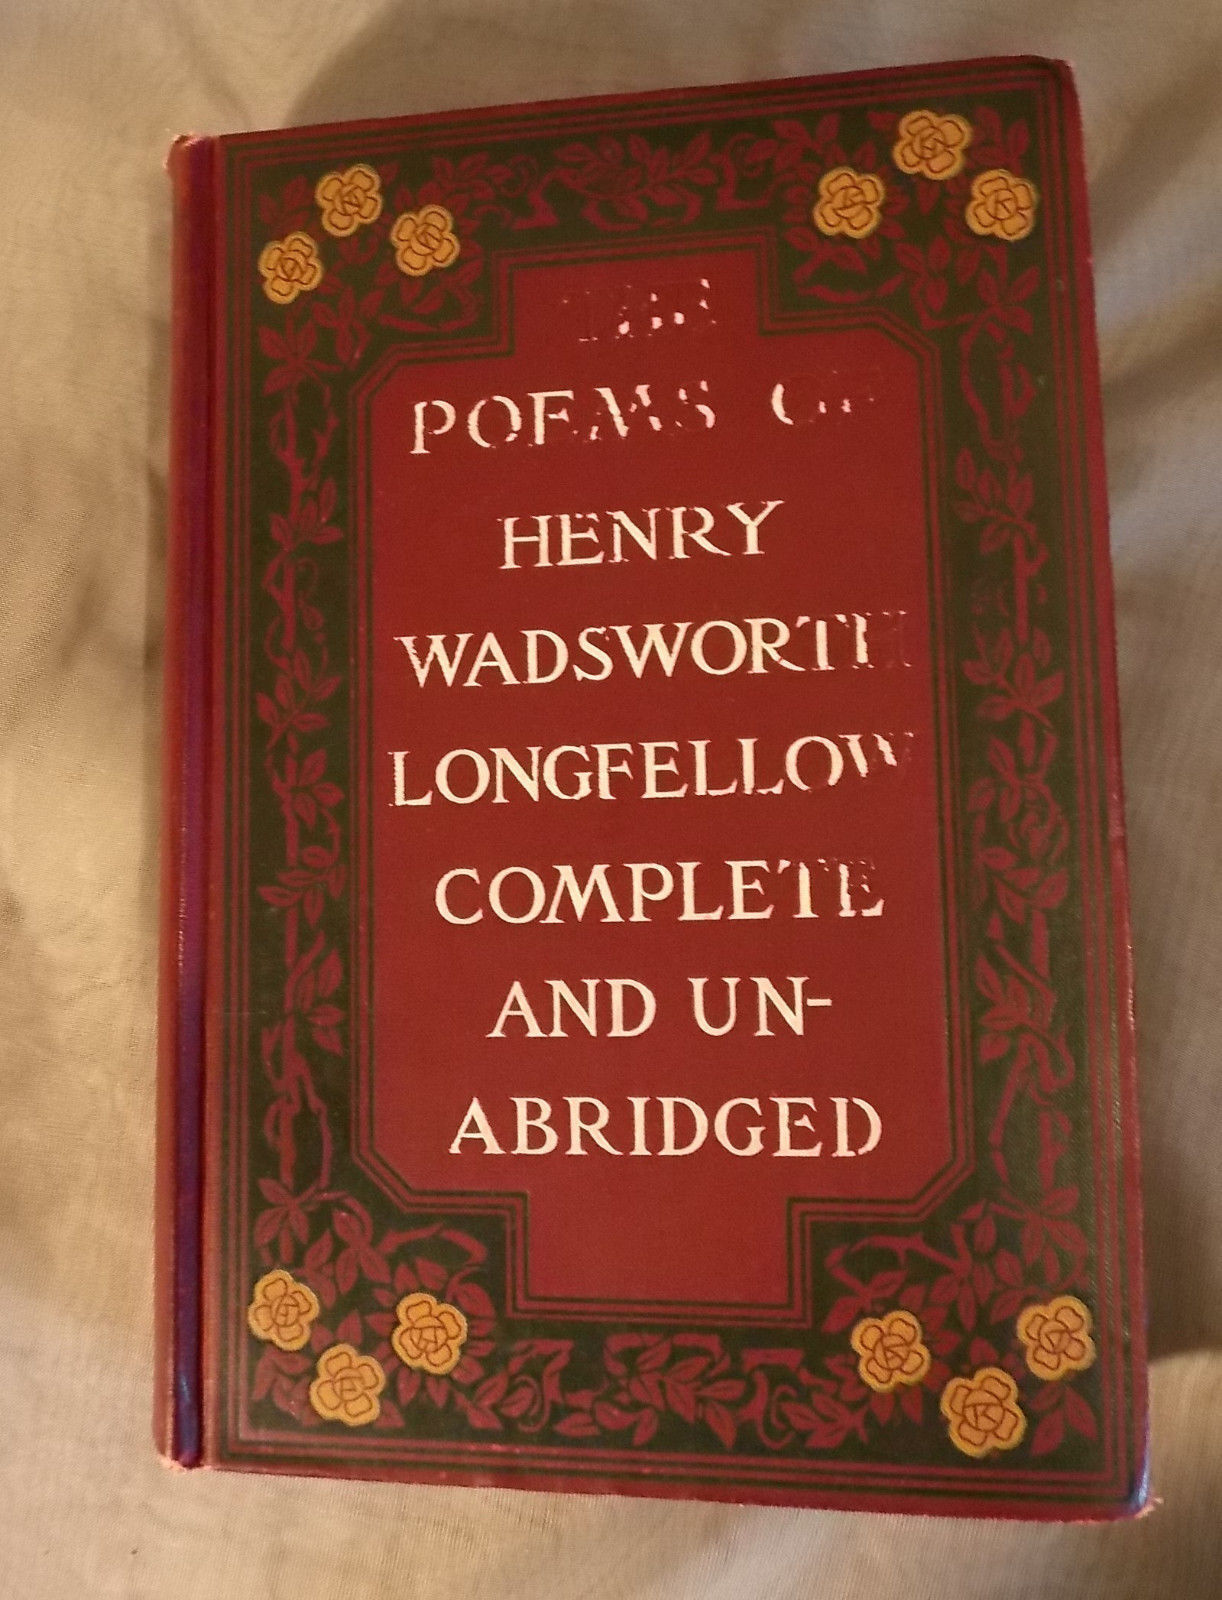 The Poems of Henry Wadsworth Longfellow Complete Unabridged 1891 Antique Grosset